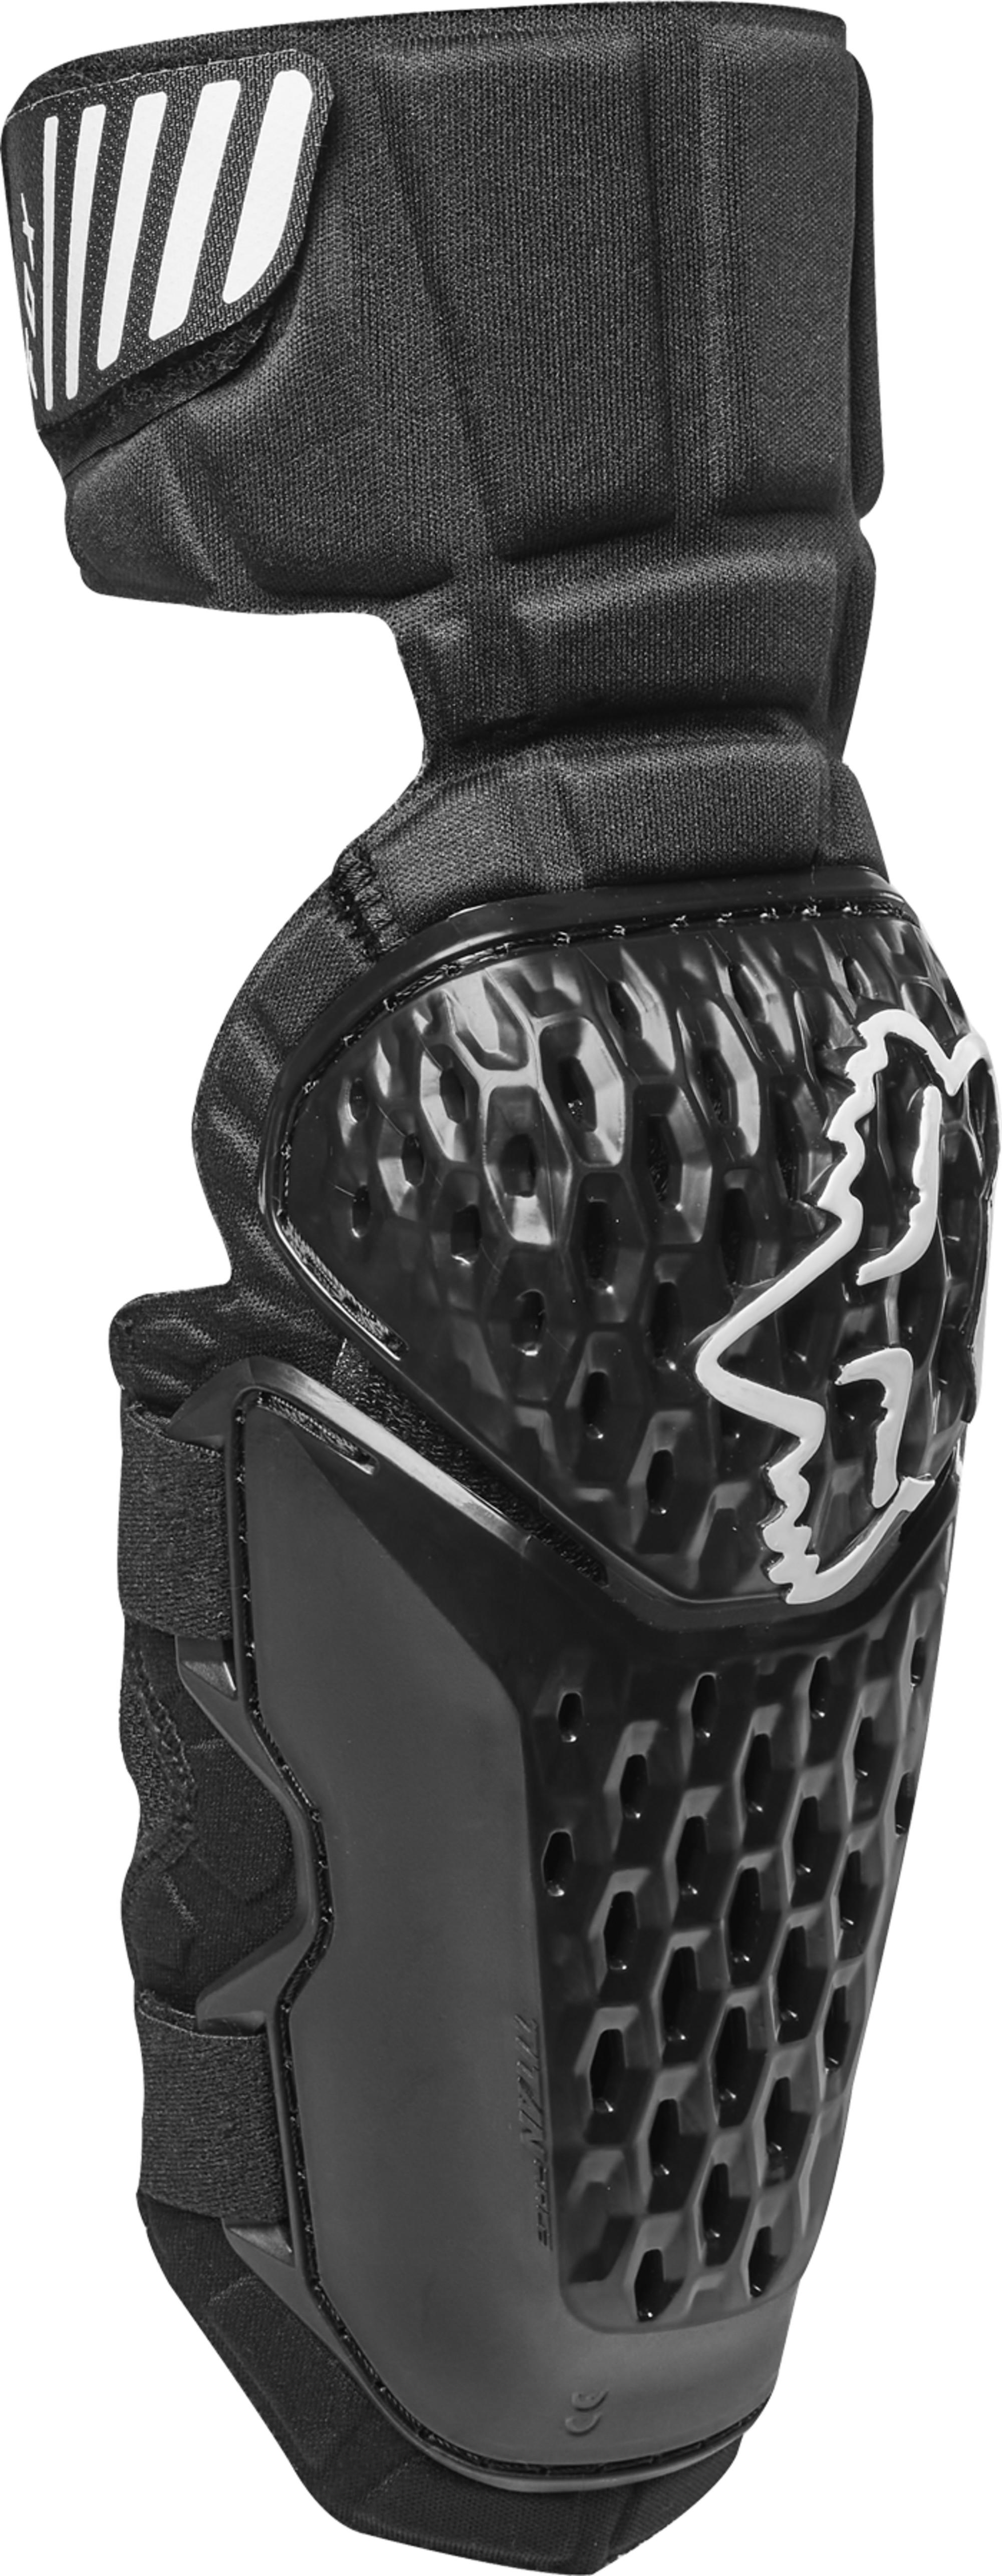 fox racing elbow guards protections for kids titan race guard